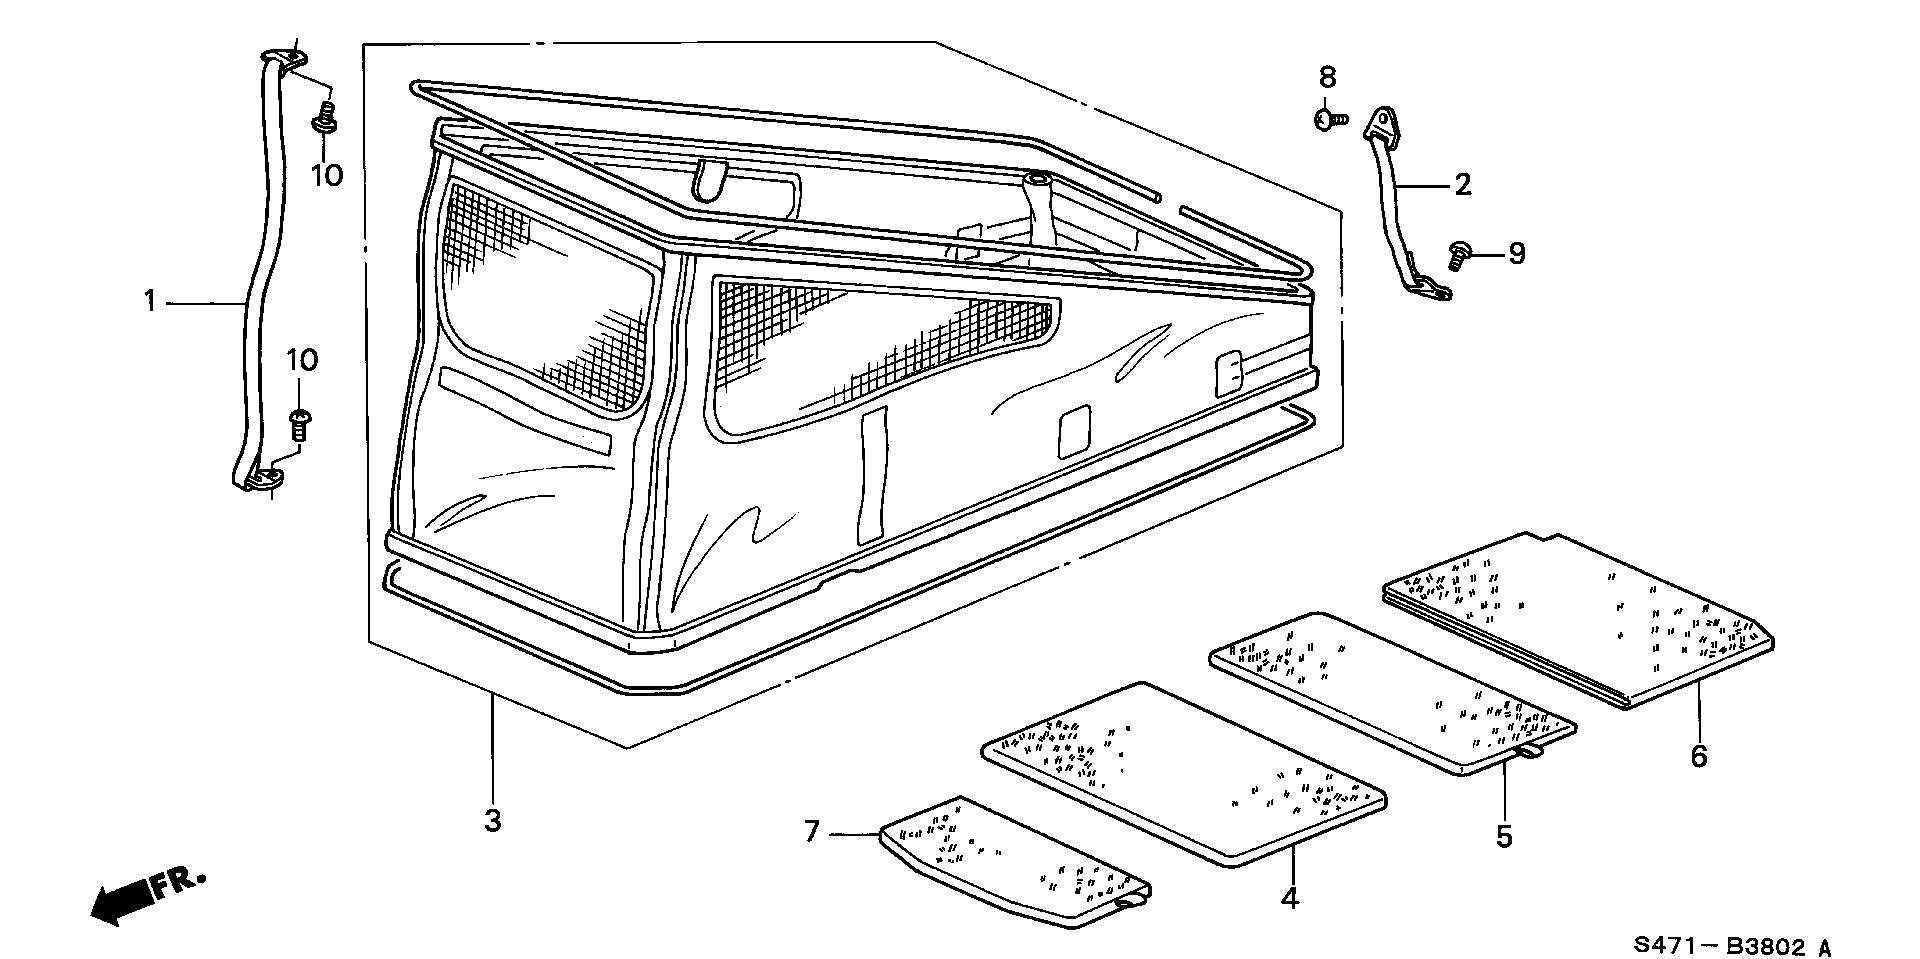 TENT/ ROOF BED( FIELD DECK)